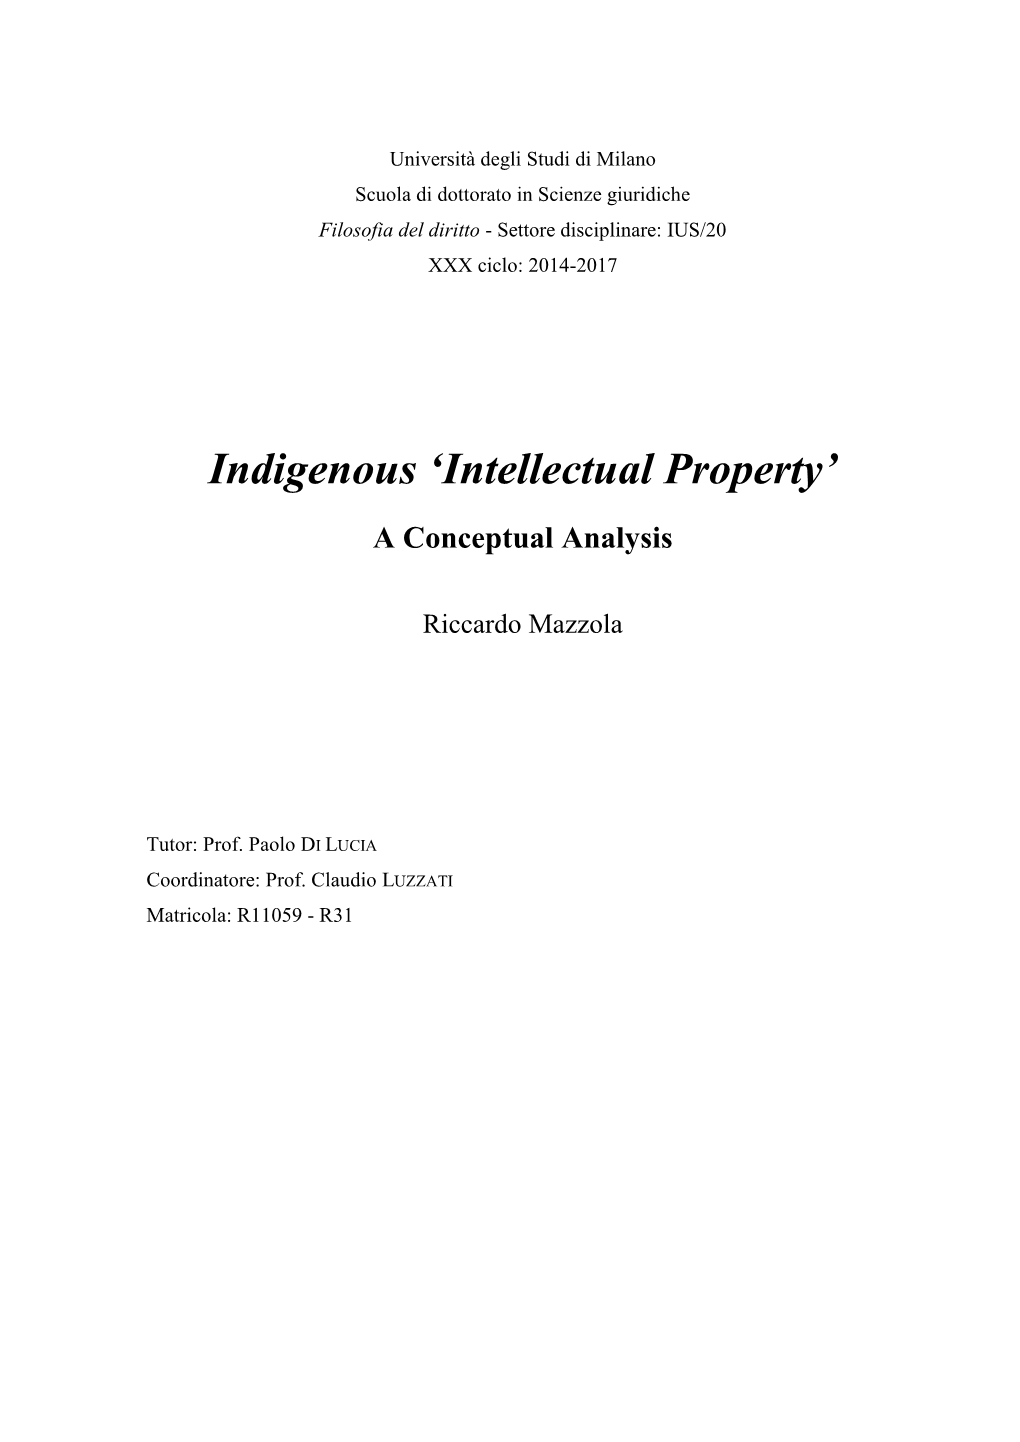 Indigenous ‘Intellectual Property’ a Conceptual Analysis